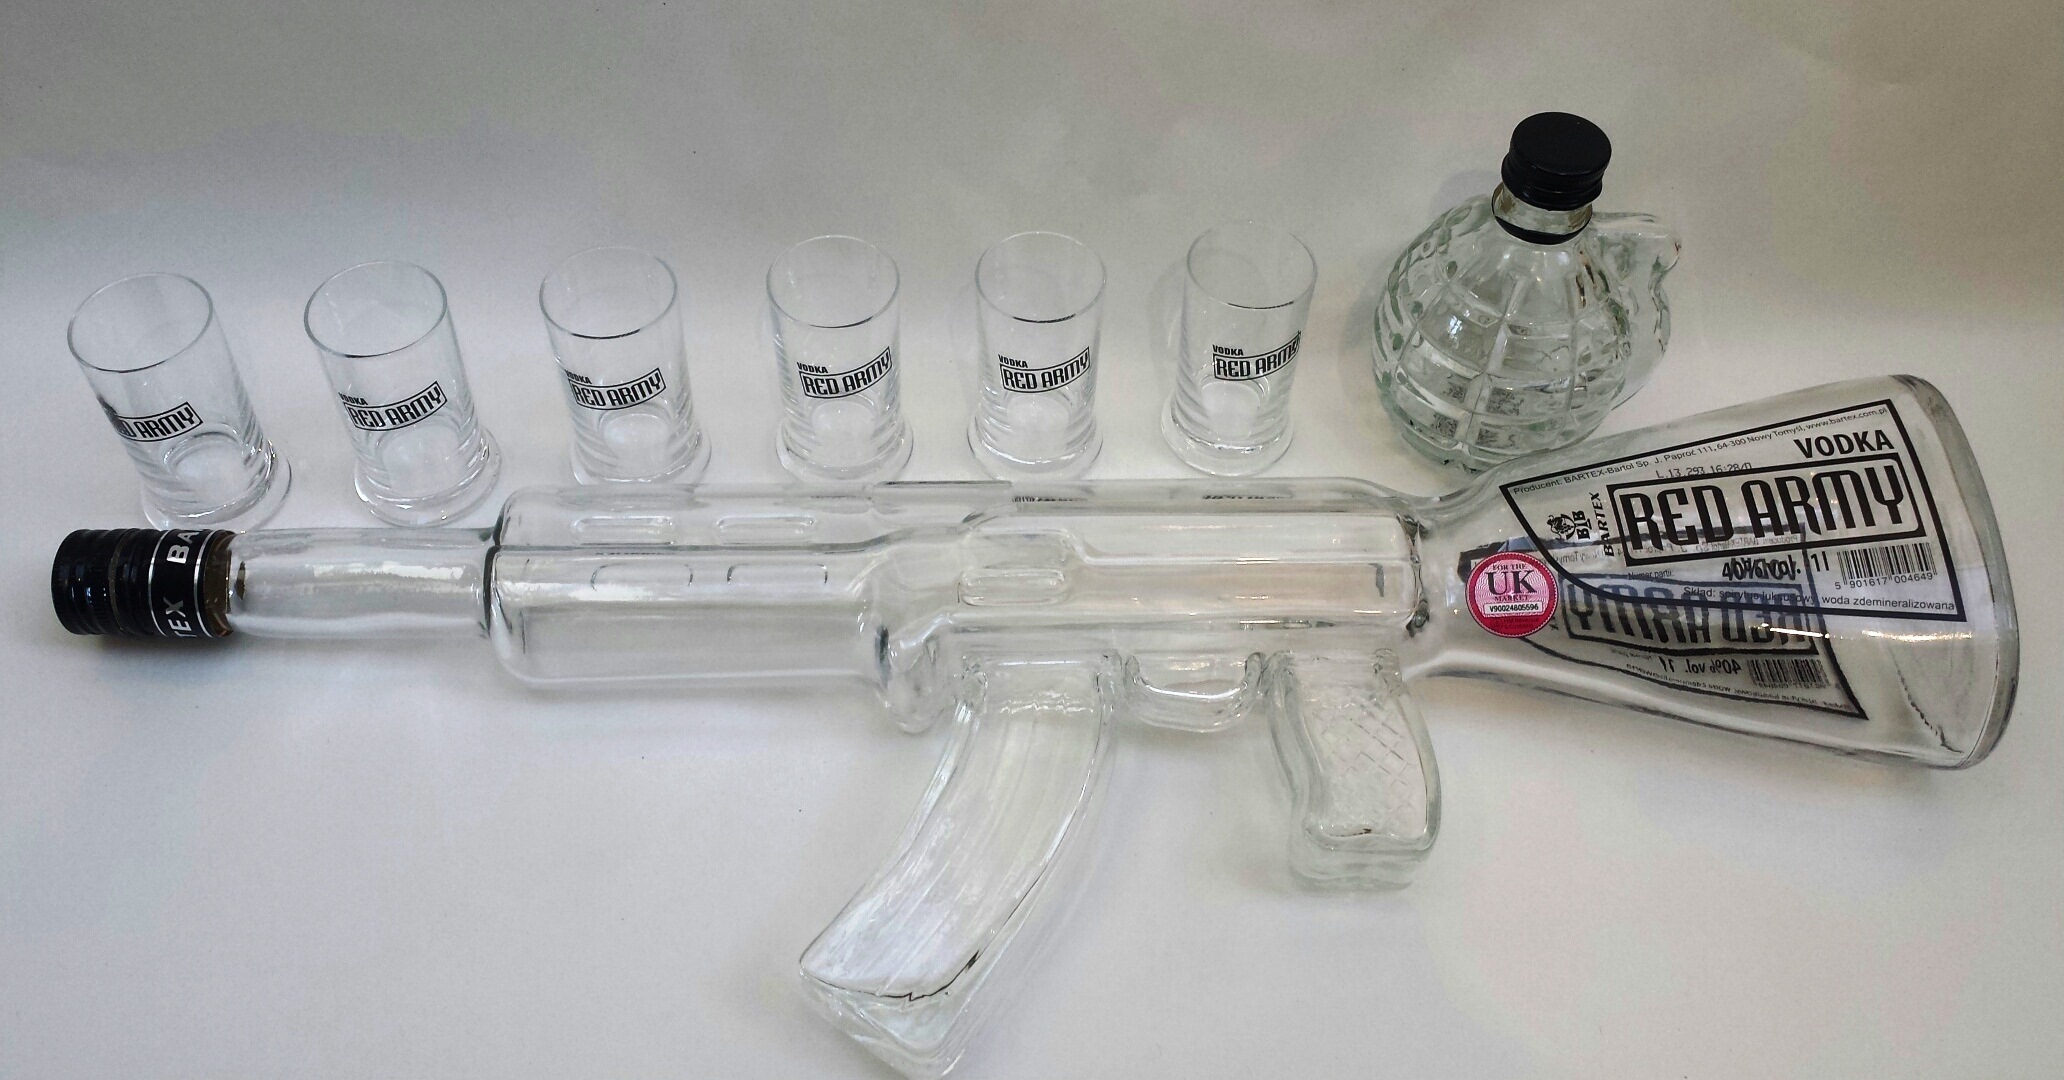 Bartex-s-rifle-shaped-bottle-is-entirely-inappropriate-says-ICP.jpg